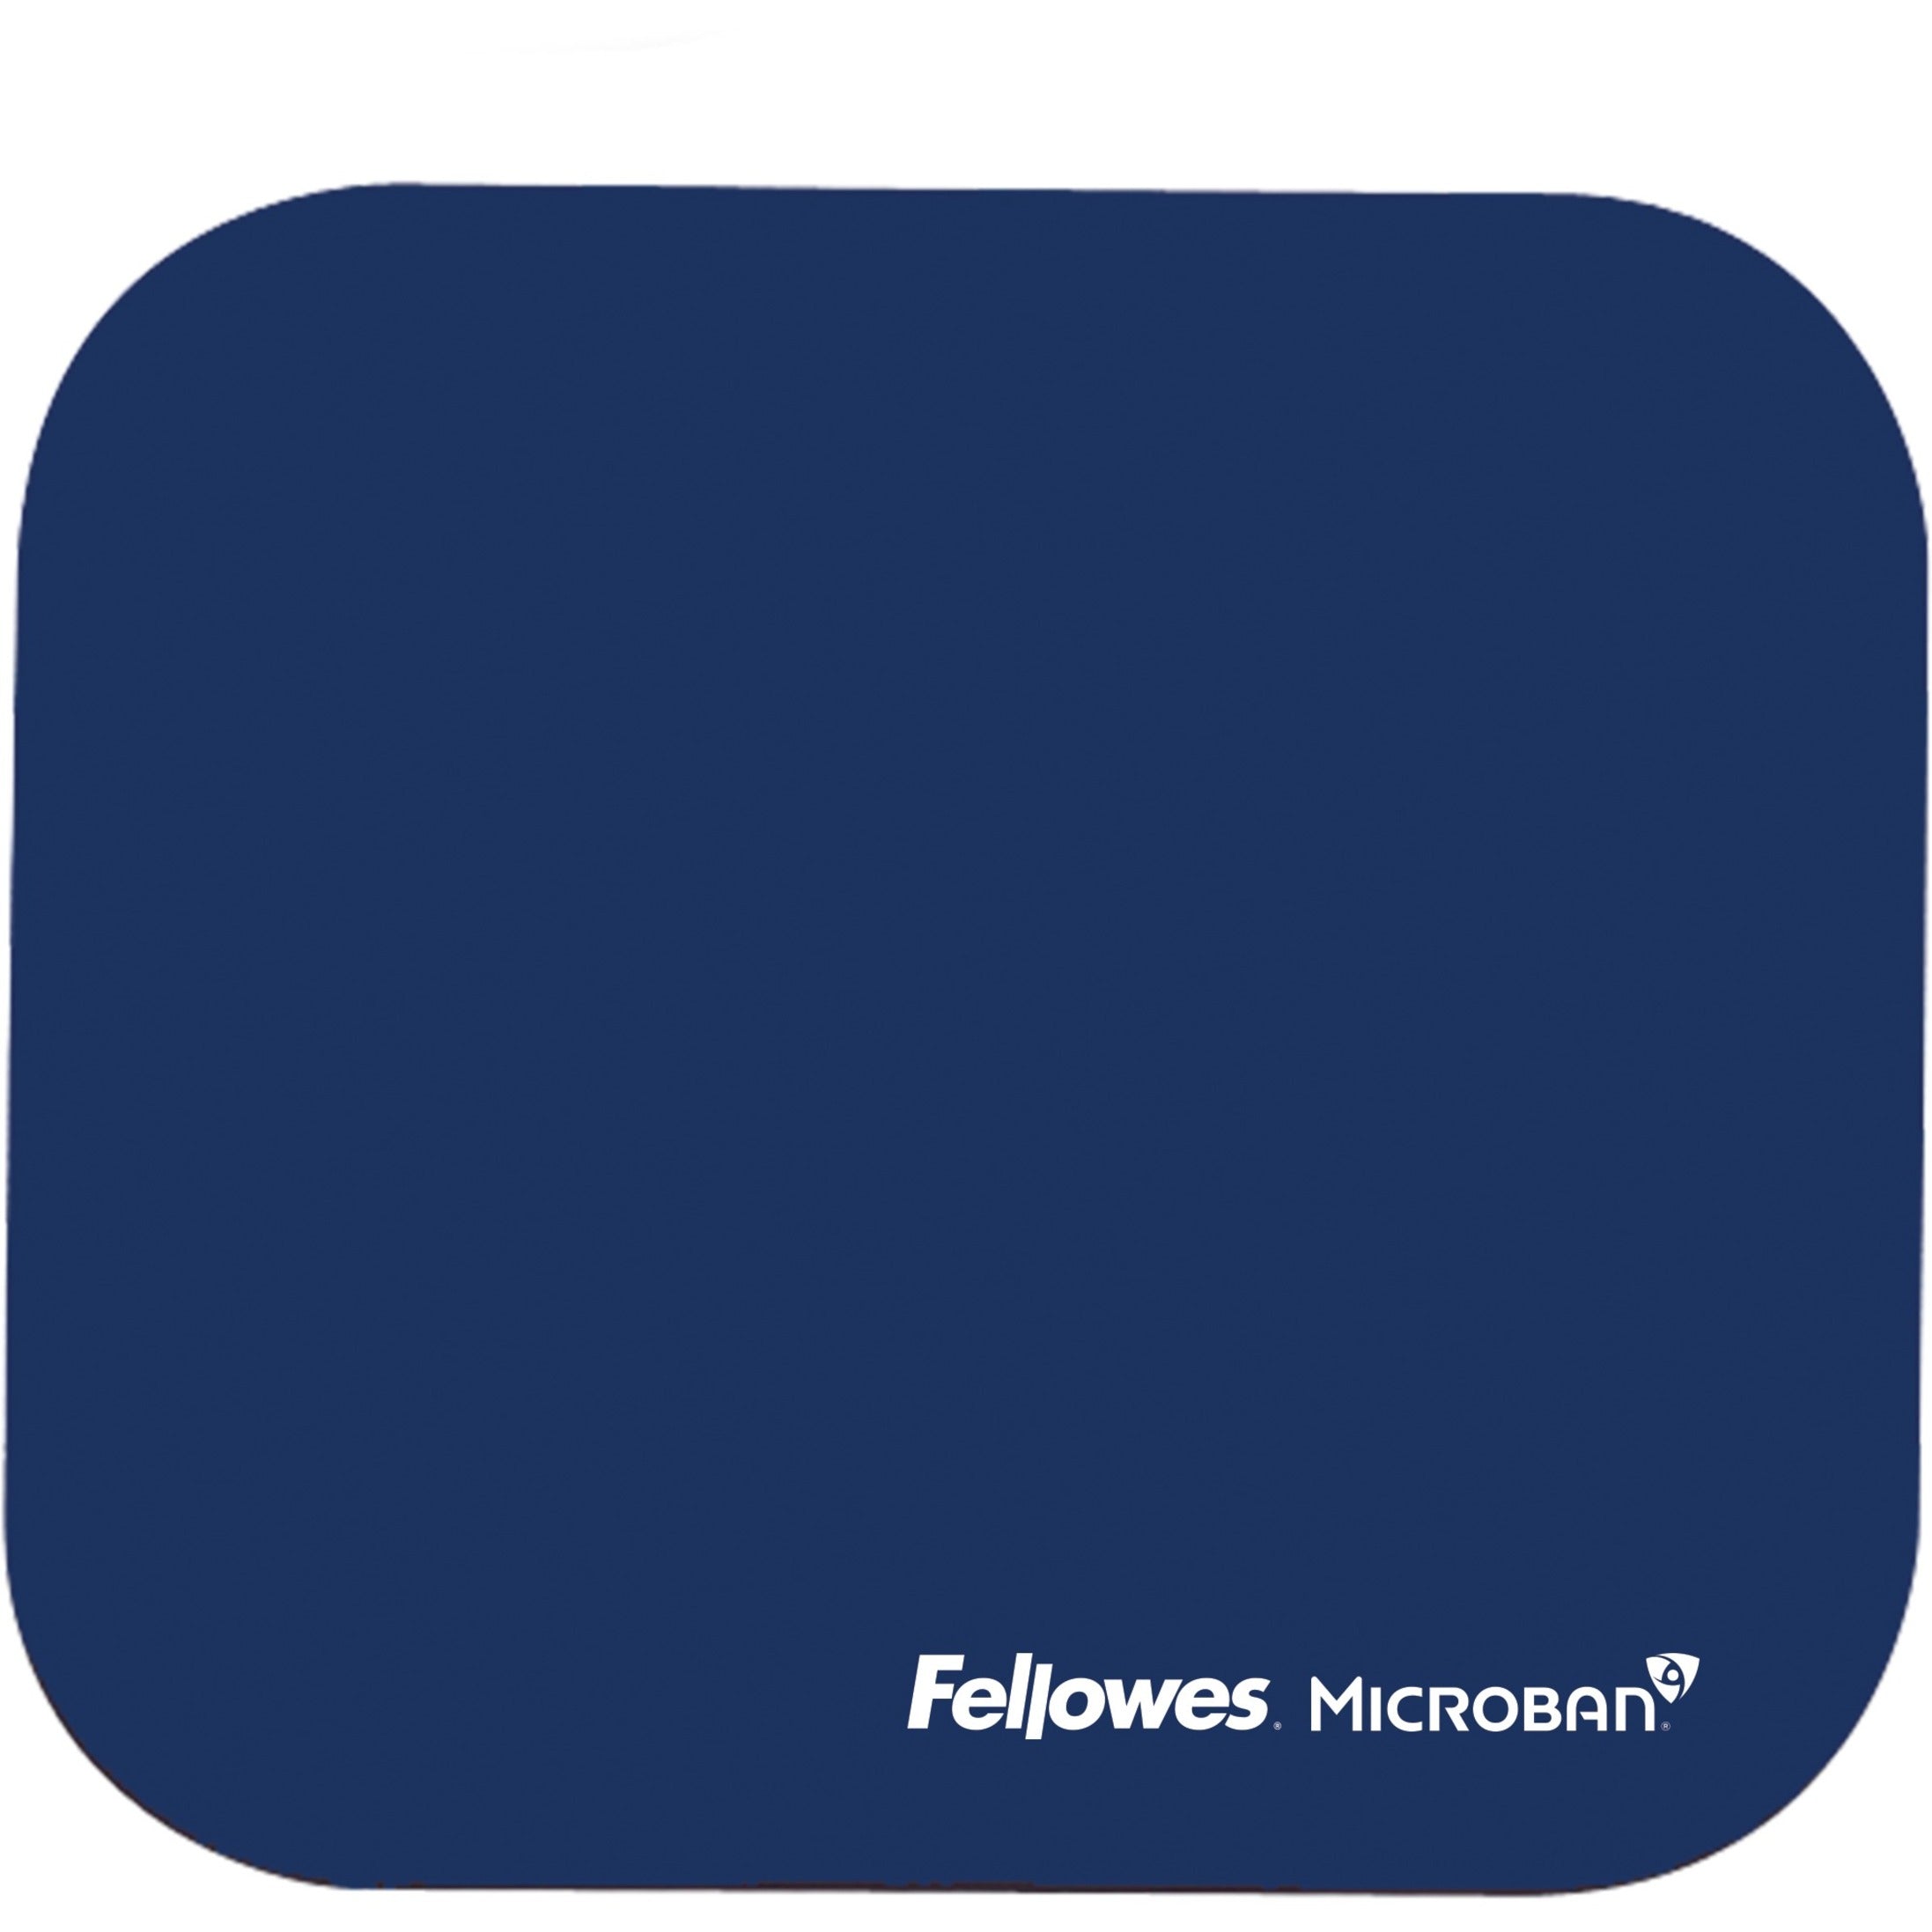 Fellowes 5933801 Microban Mouse Pad, Nonskid, Navy Blue, 9x8x1/8